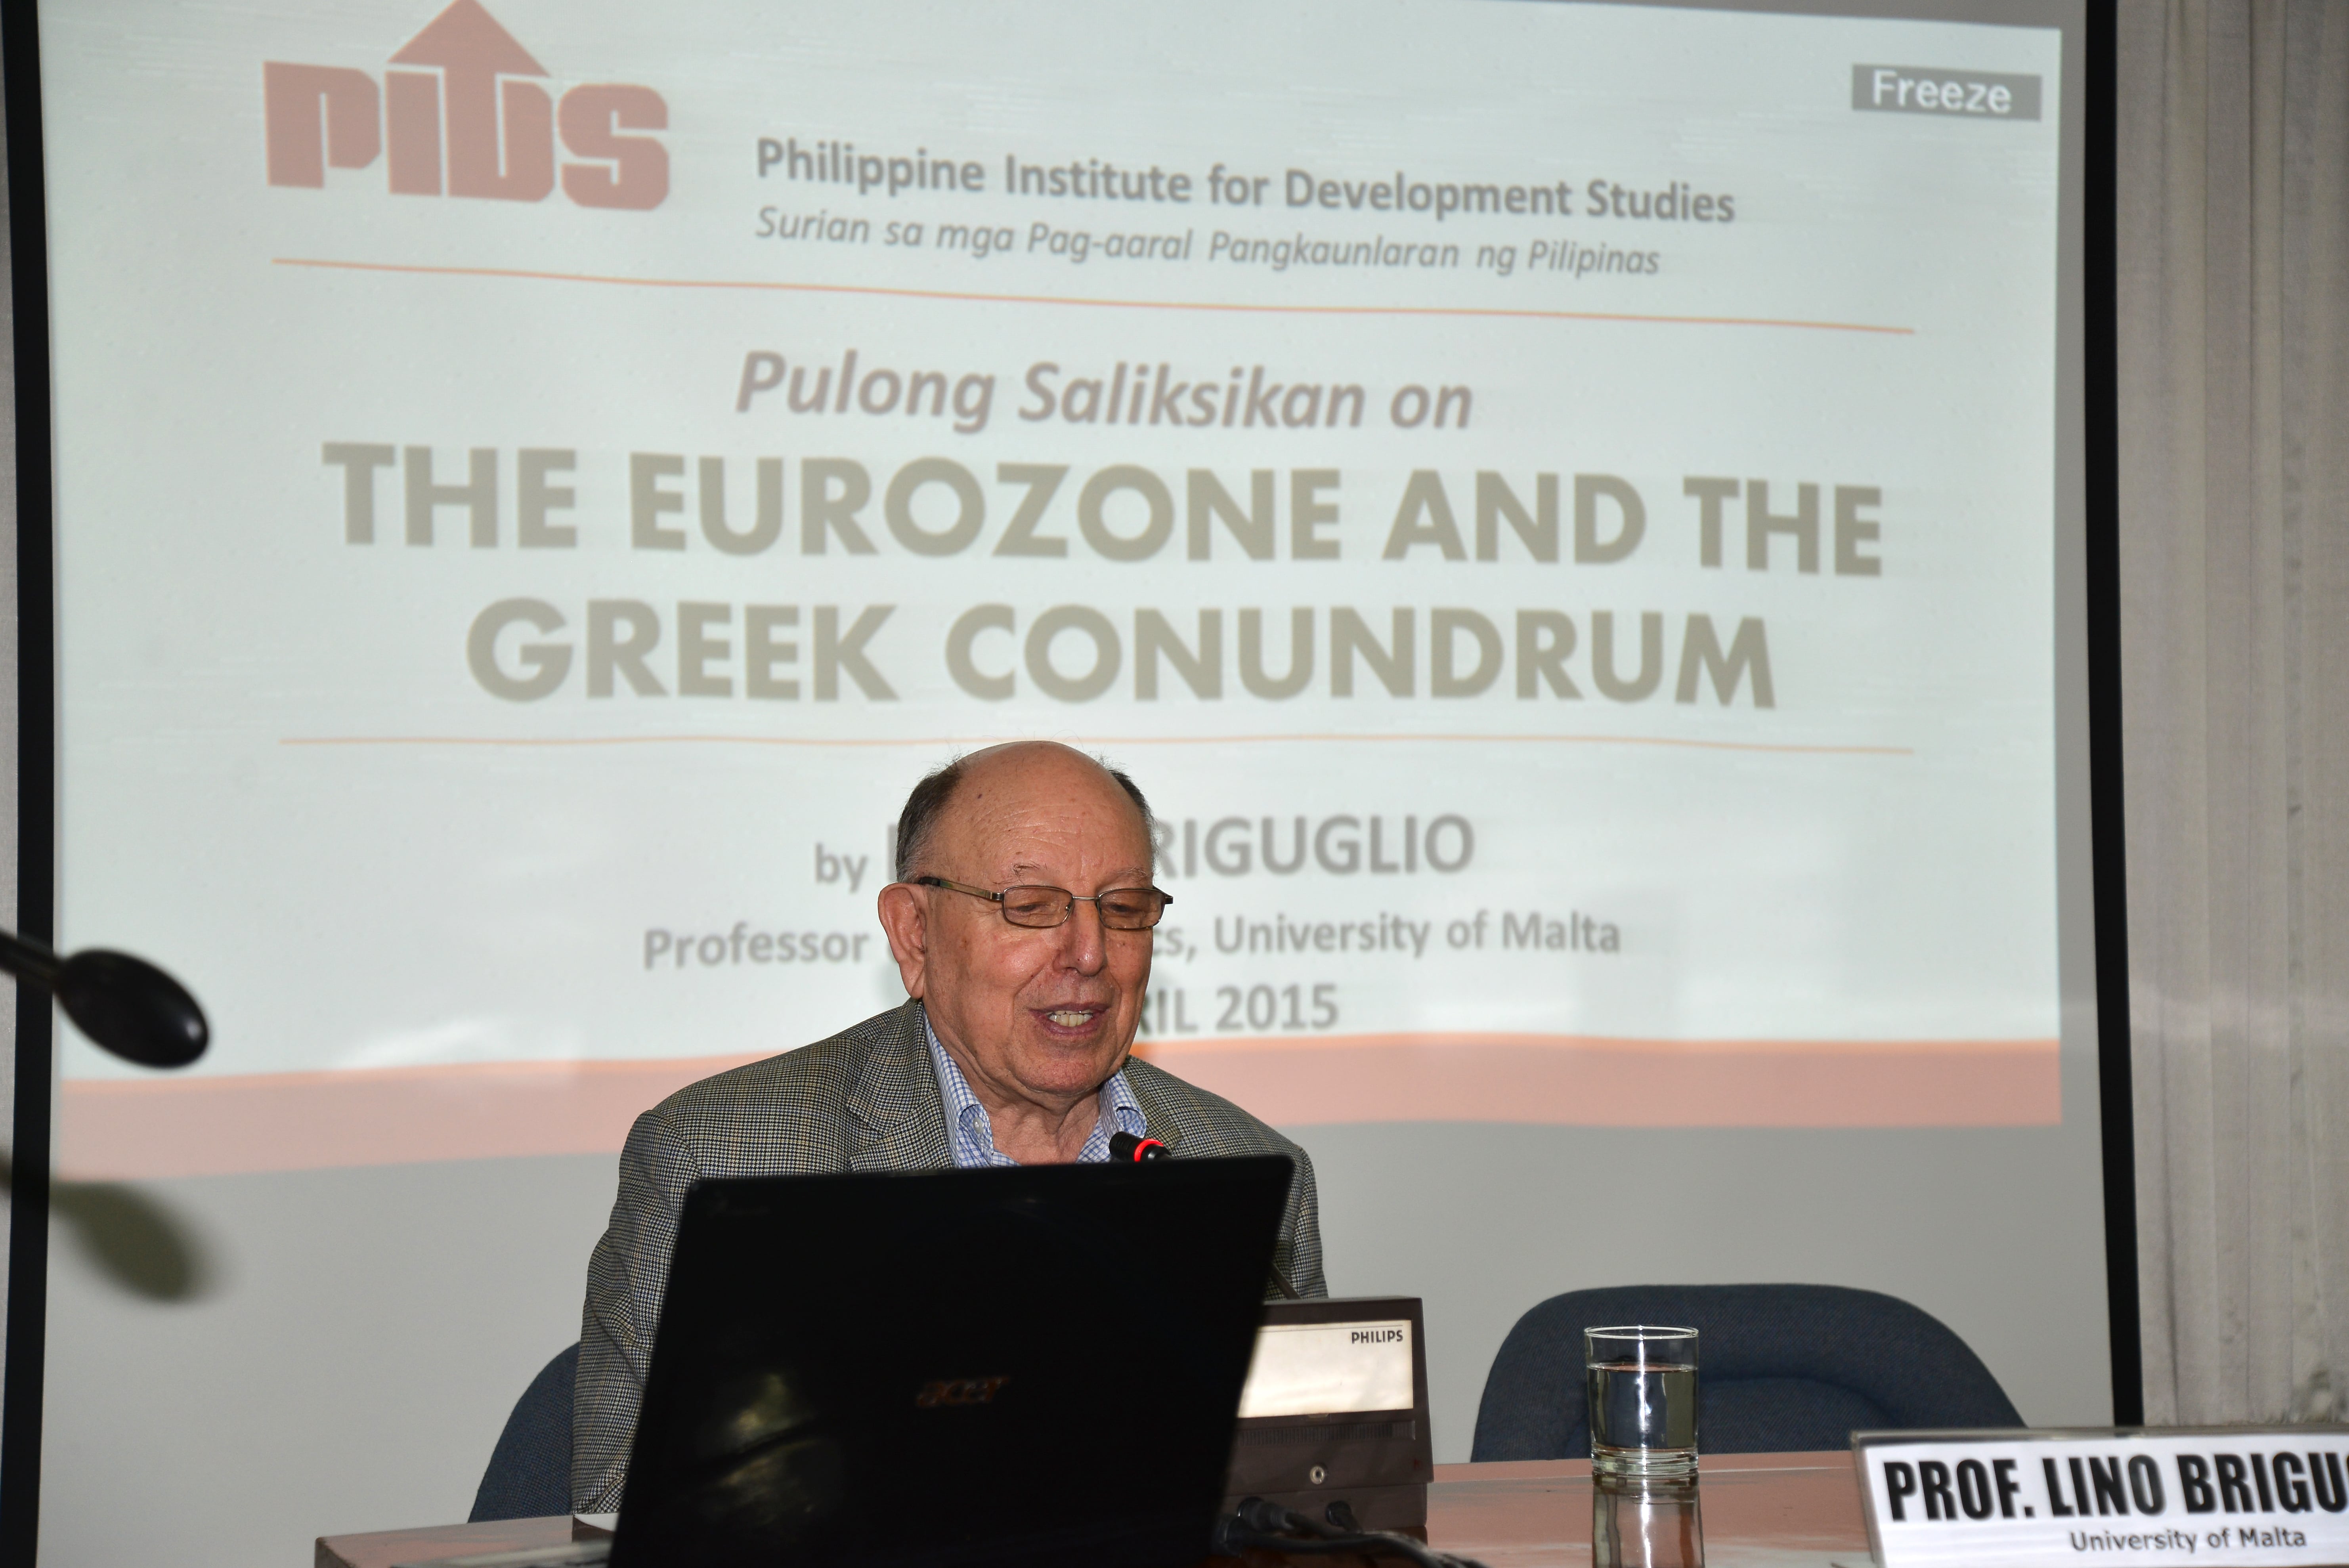 Pulong Saliksikan On The Eurozone And The Greek Conundrum-DSC_1277.jpg